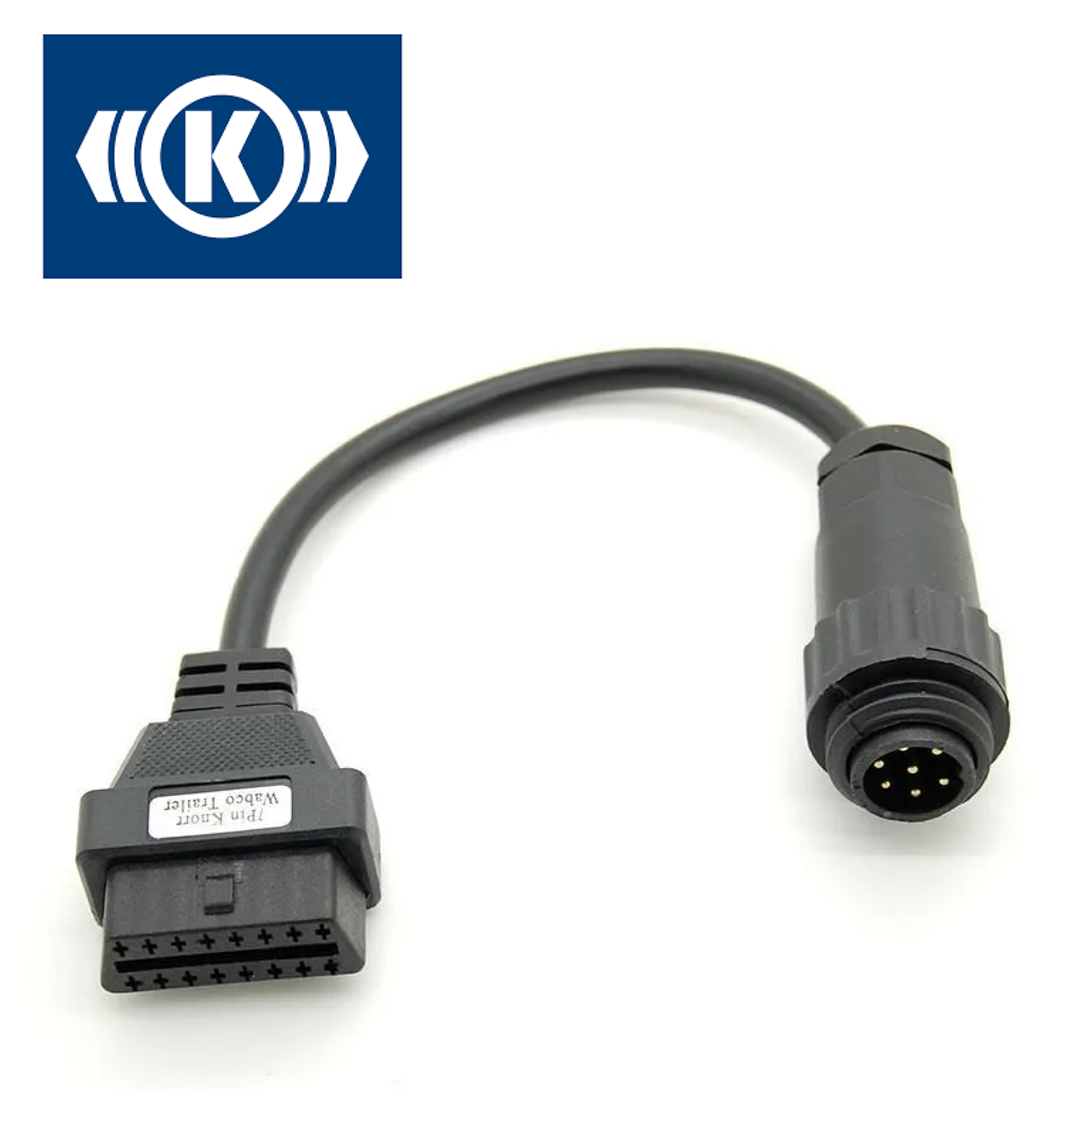 adaptateur-knorr-wabco-7-broches-compatible-valises-diagnostic-icarsoft-france